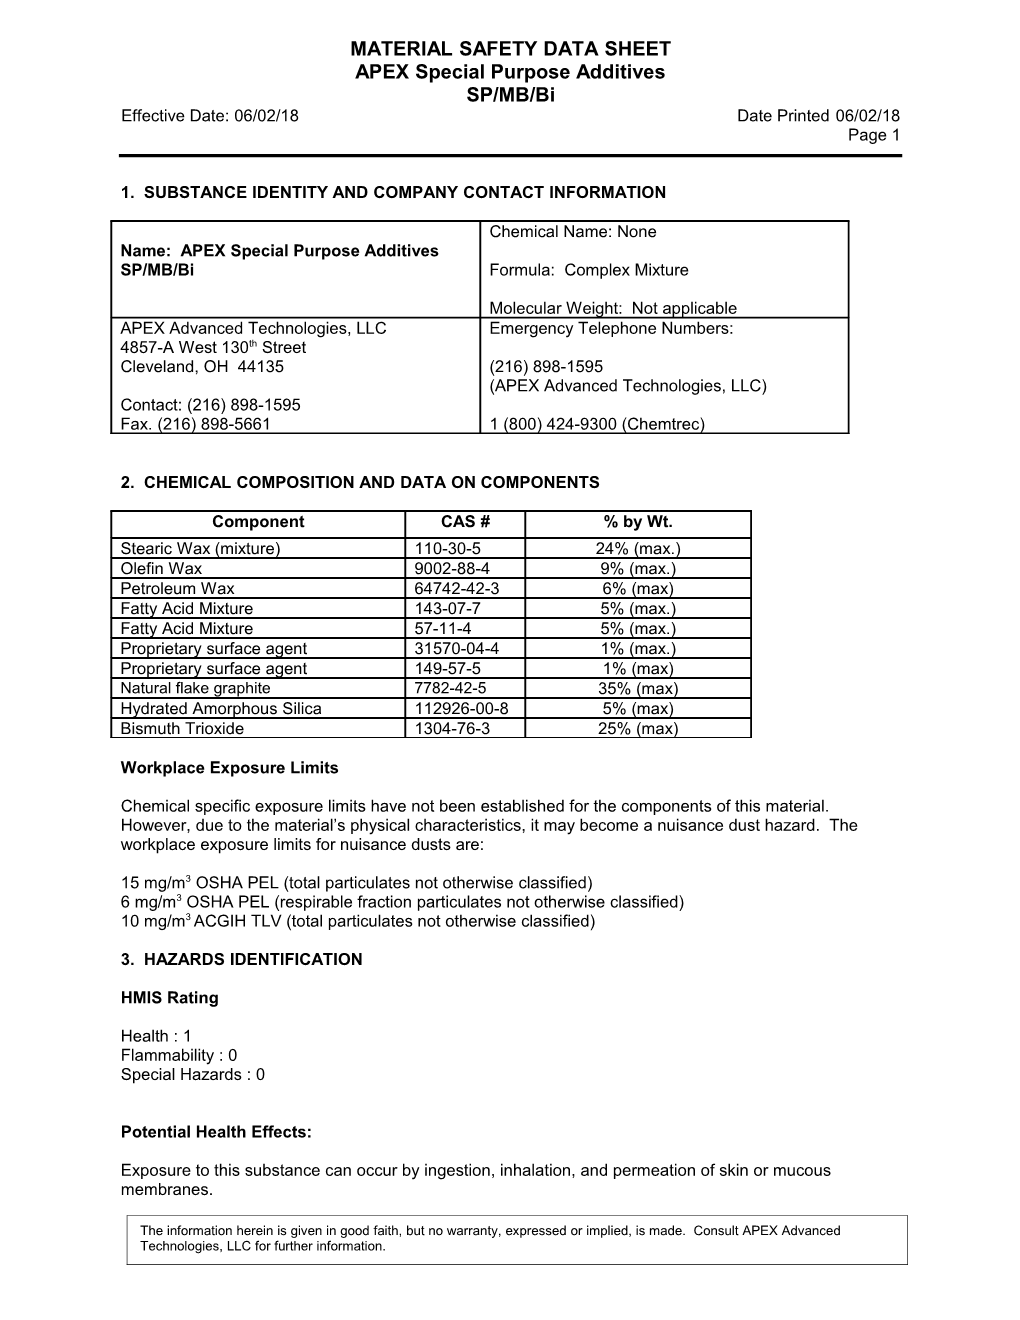 Material Safety Data Sheet s129